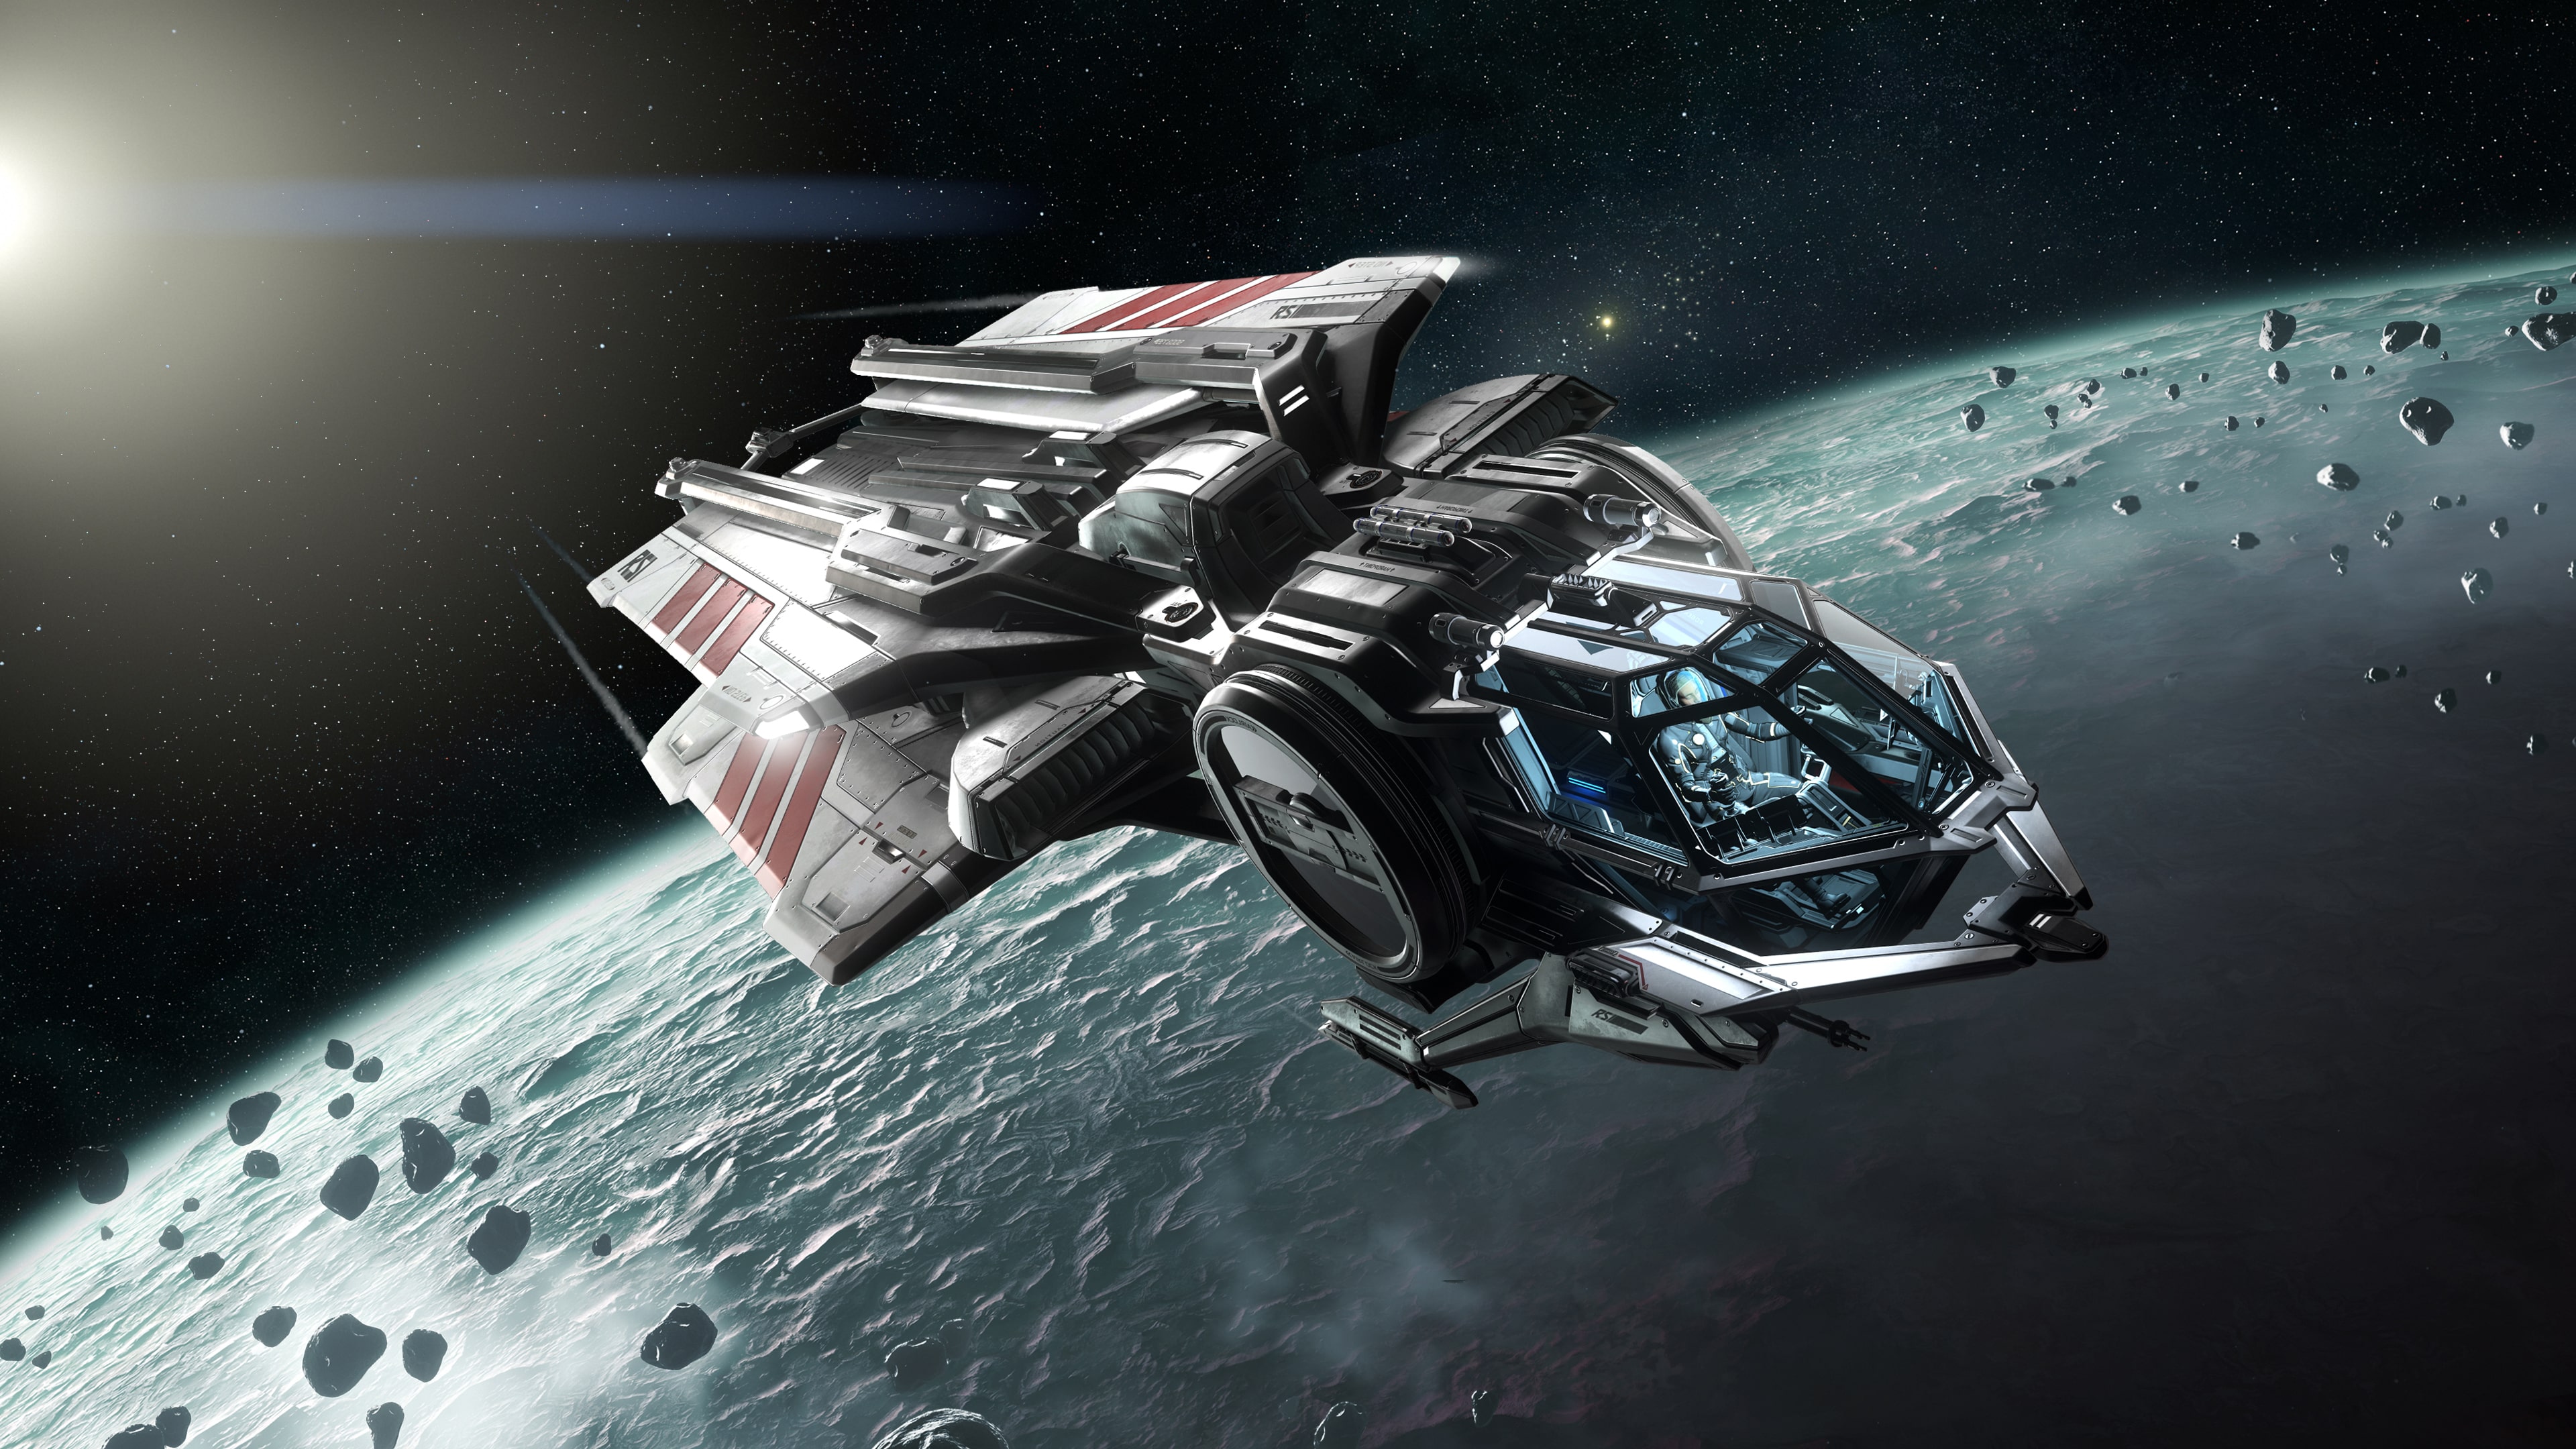 Star Citizen developers received more than $500 million from users to develop the game